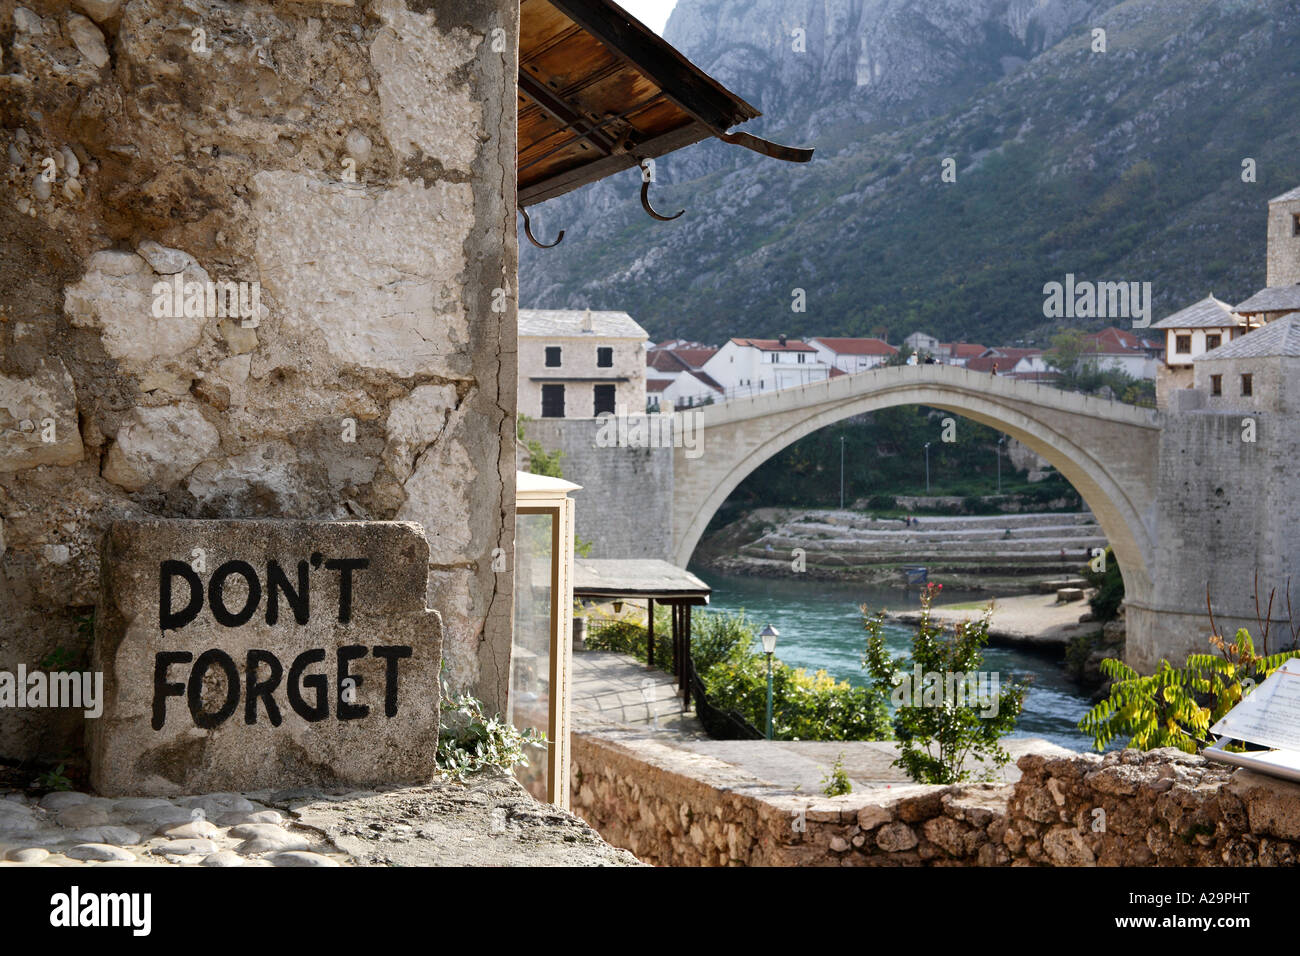 Don't Forget sign and new bridge. Mostar, Bosnia and Herzegovina, Europe Stock Photo